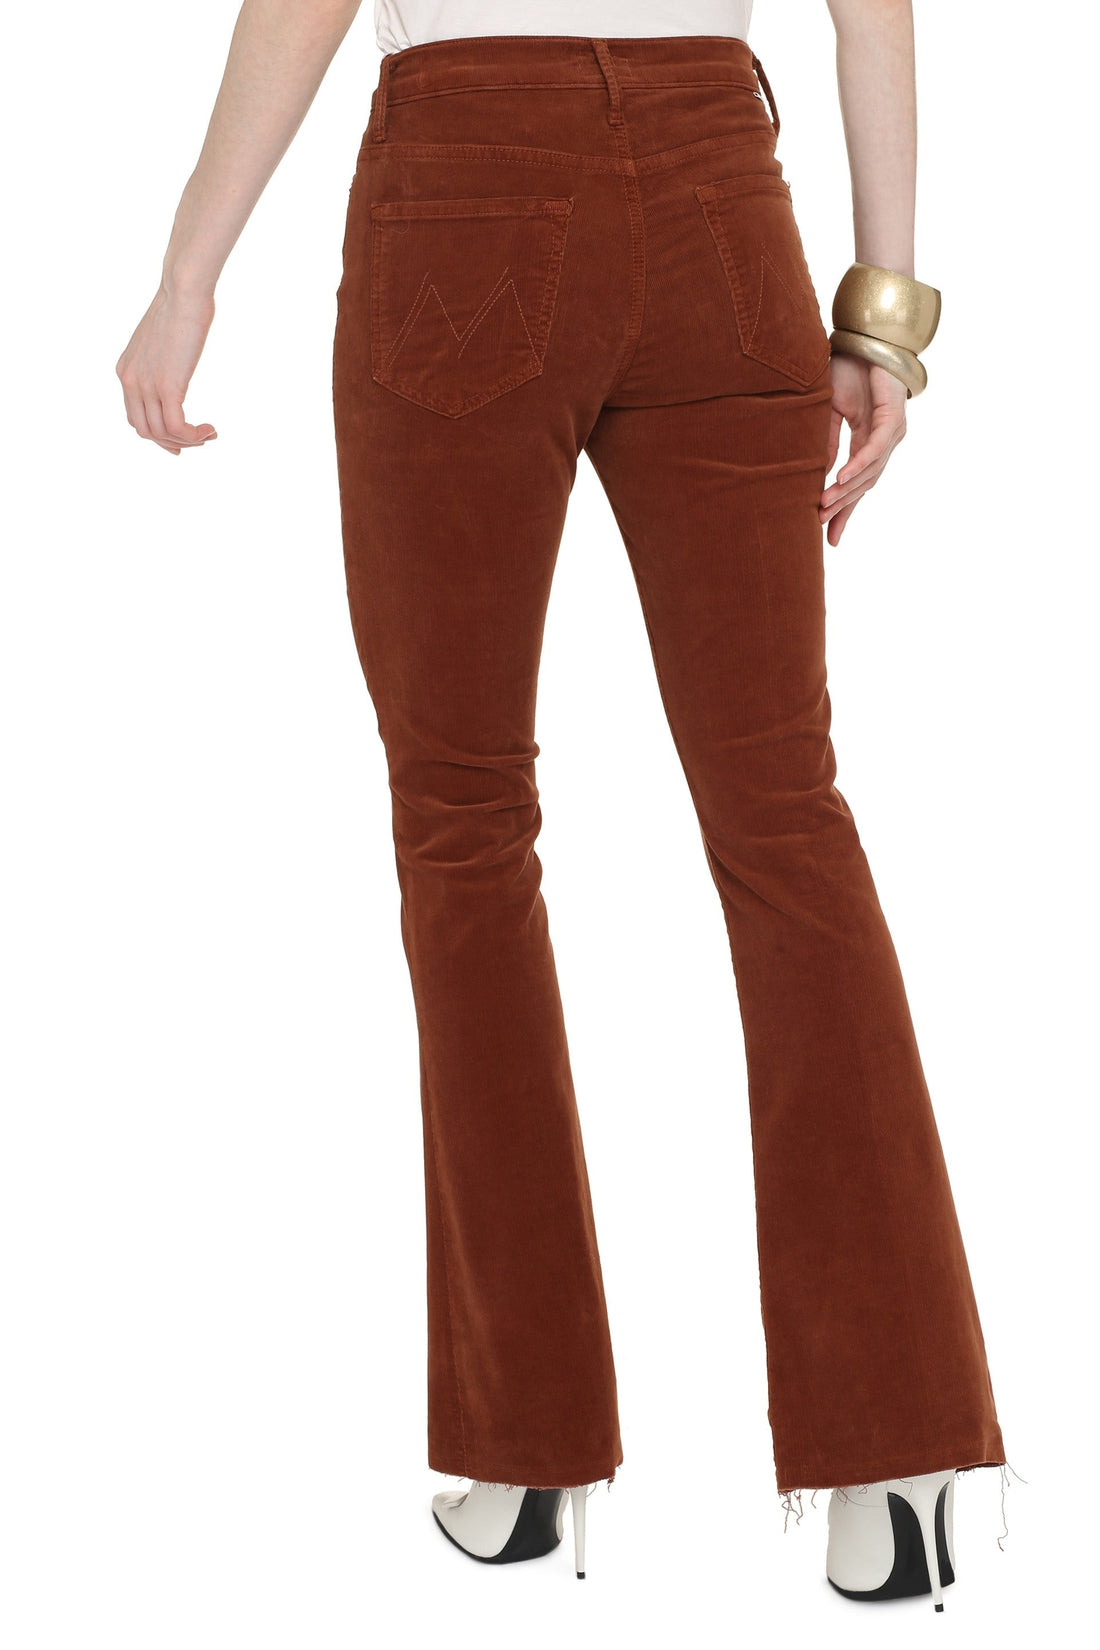 Mother-OUTLET-SALE-The Weekender Fray corduroy flared trousers-ARCHIVIST